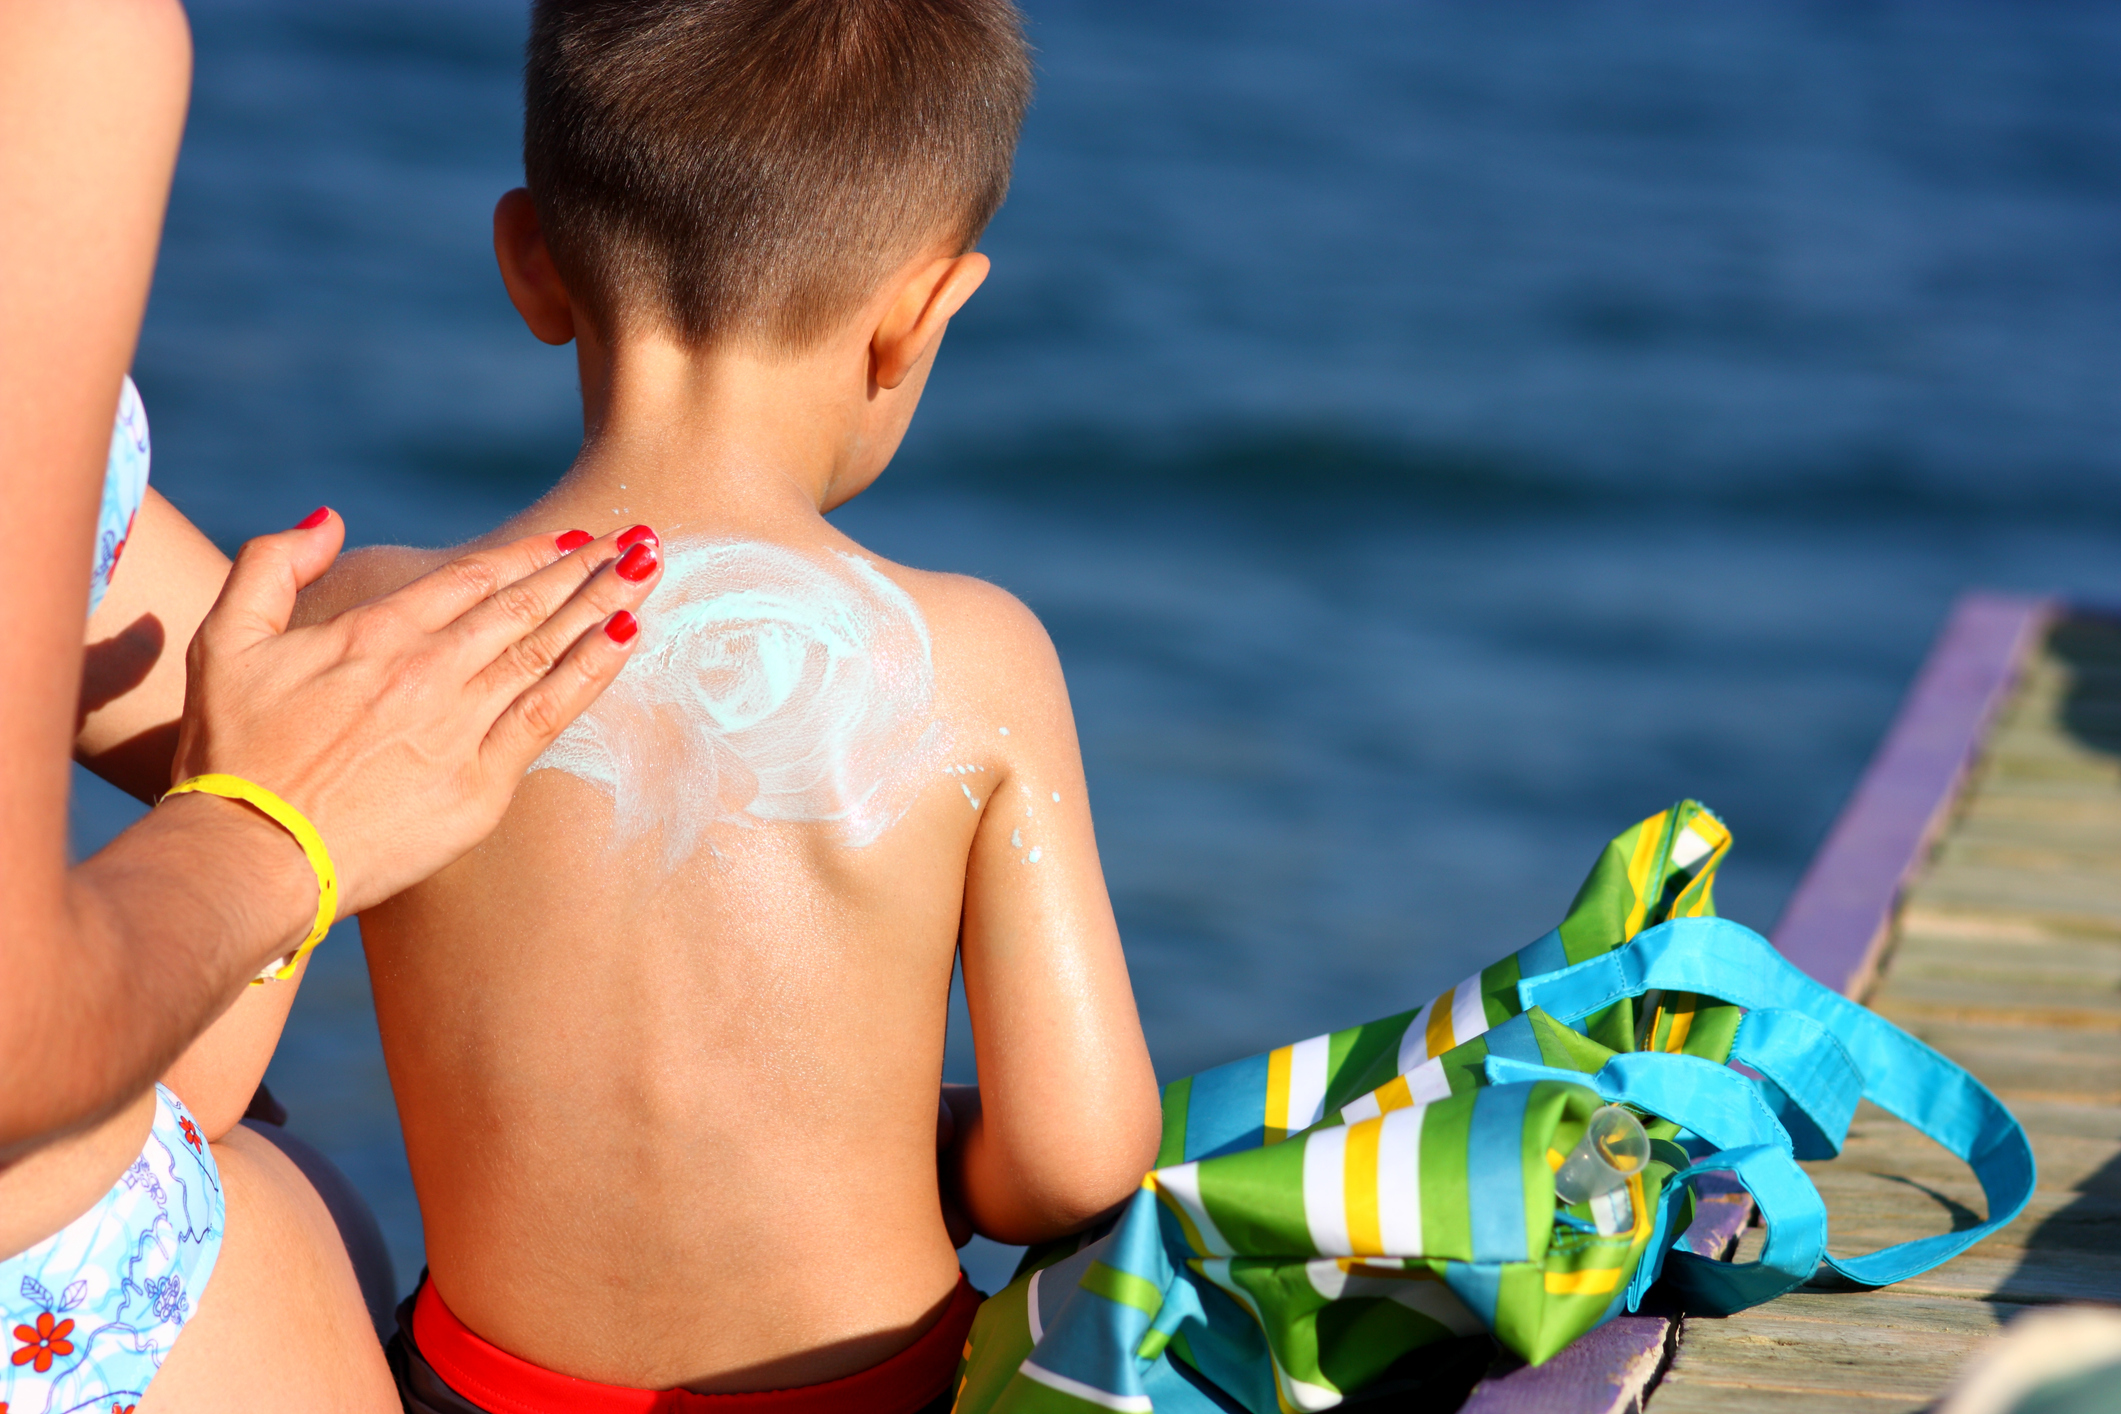 Concerns raised over chemicals found in sunscreen making their way into the bloodstream